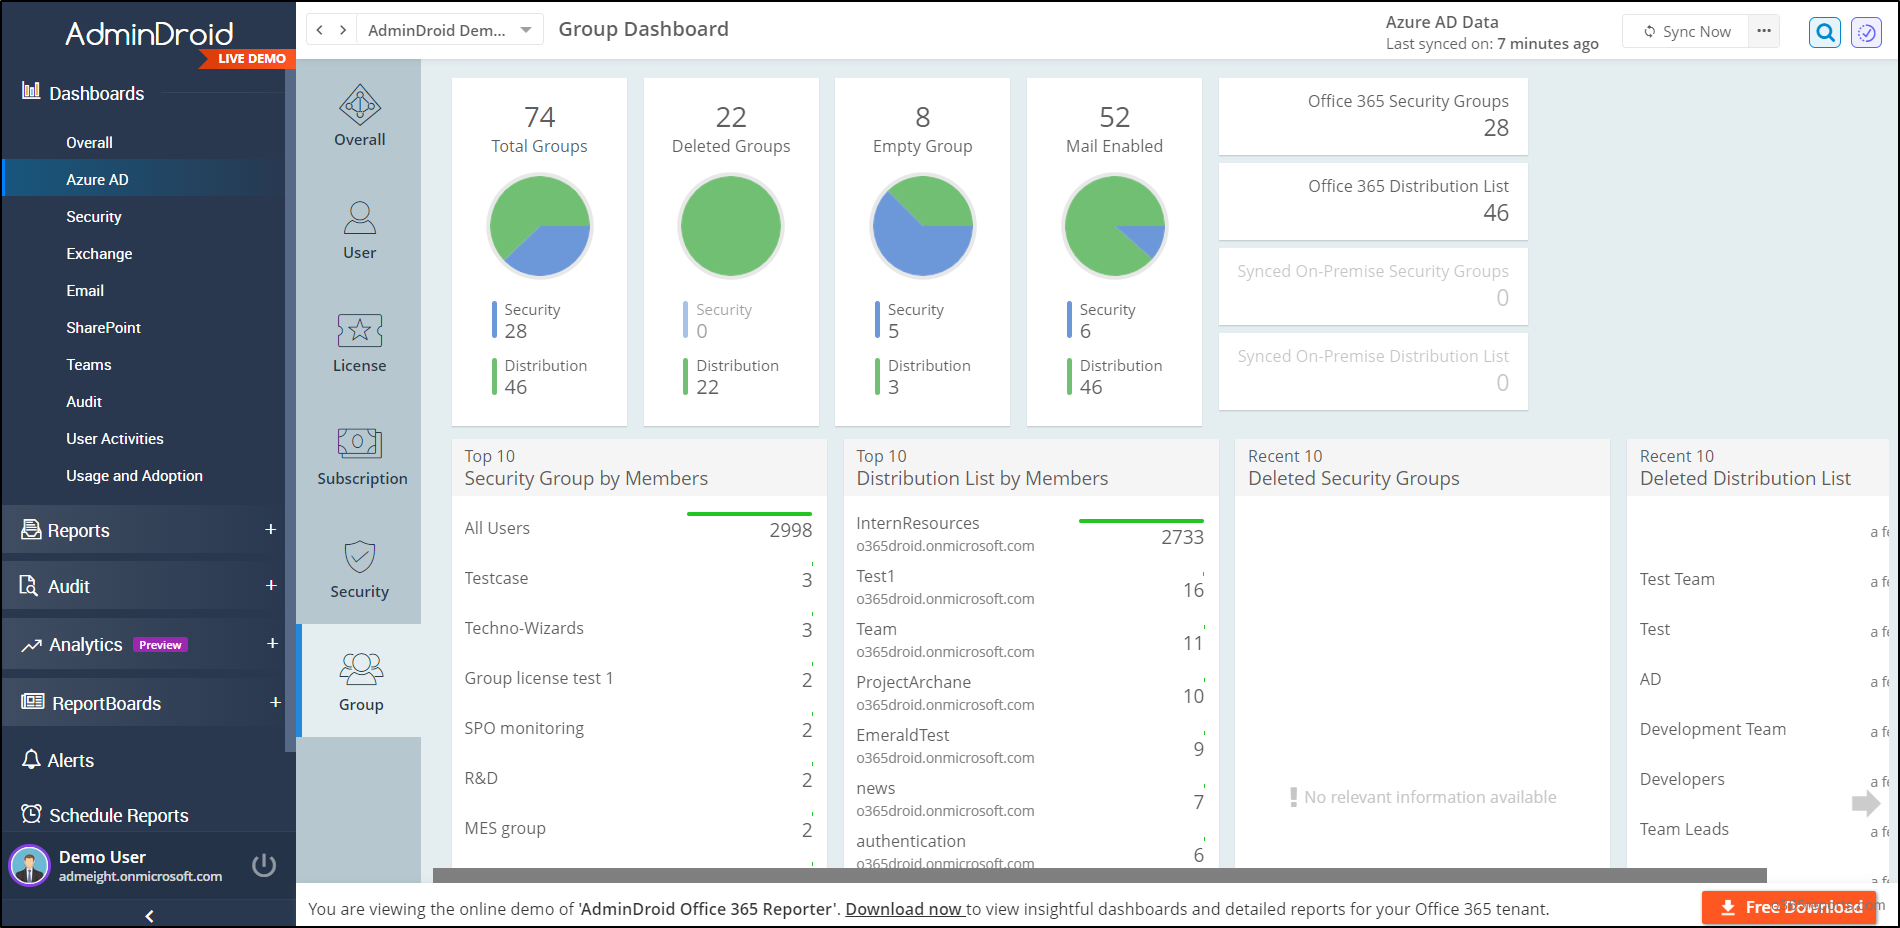 Azure AD Groups Dashboard - AdminDroid